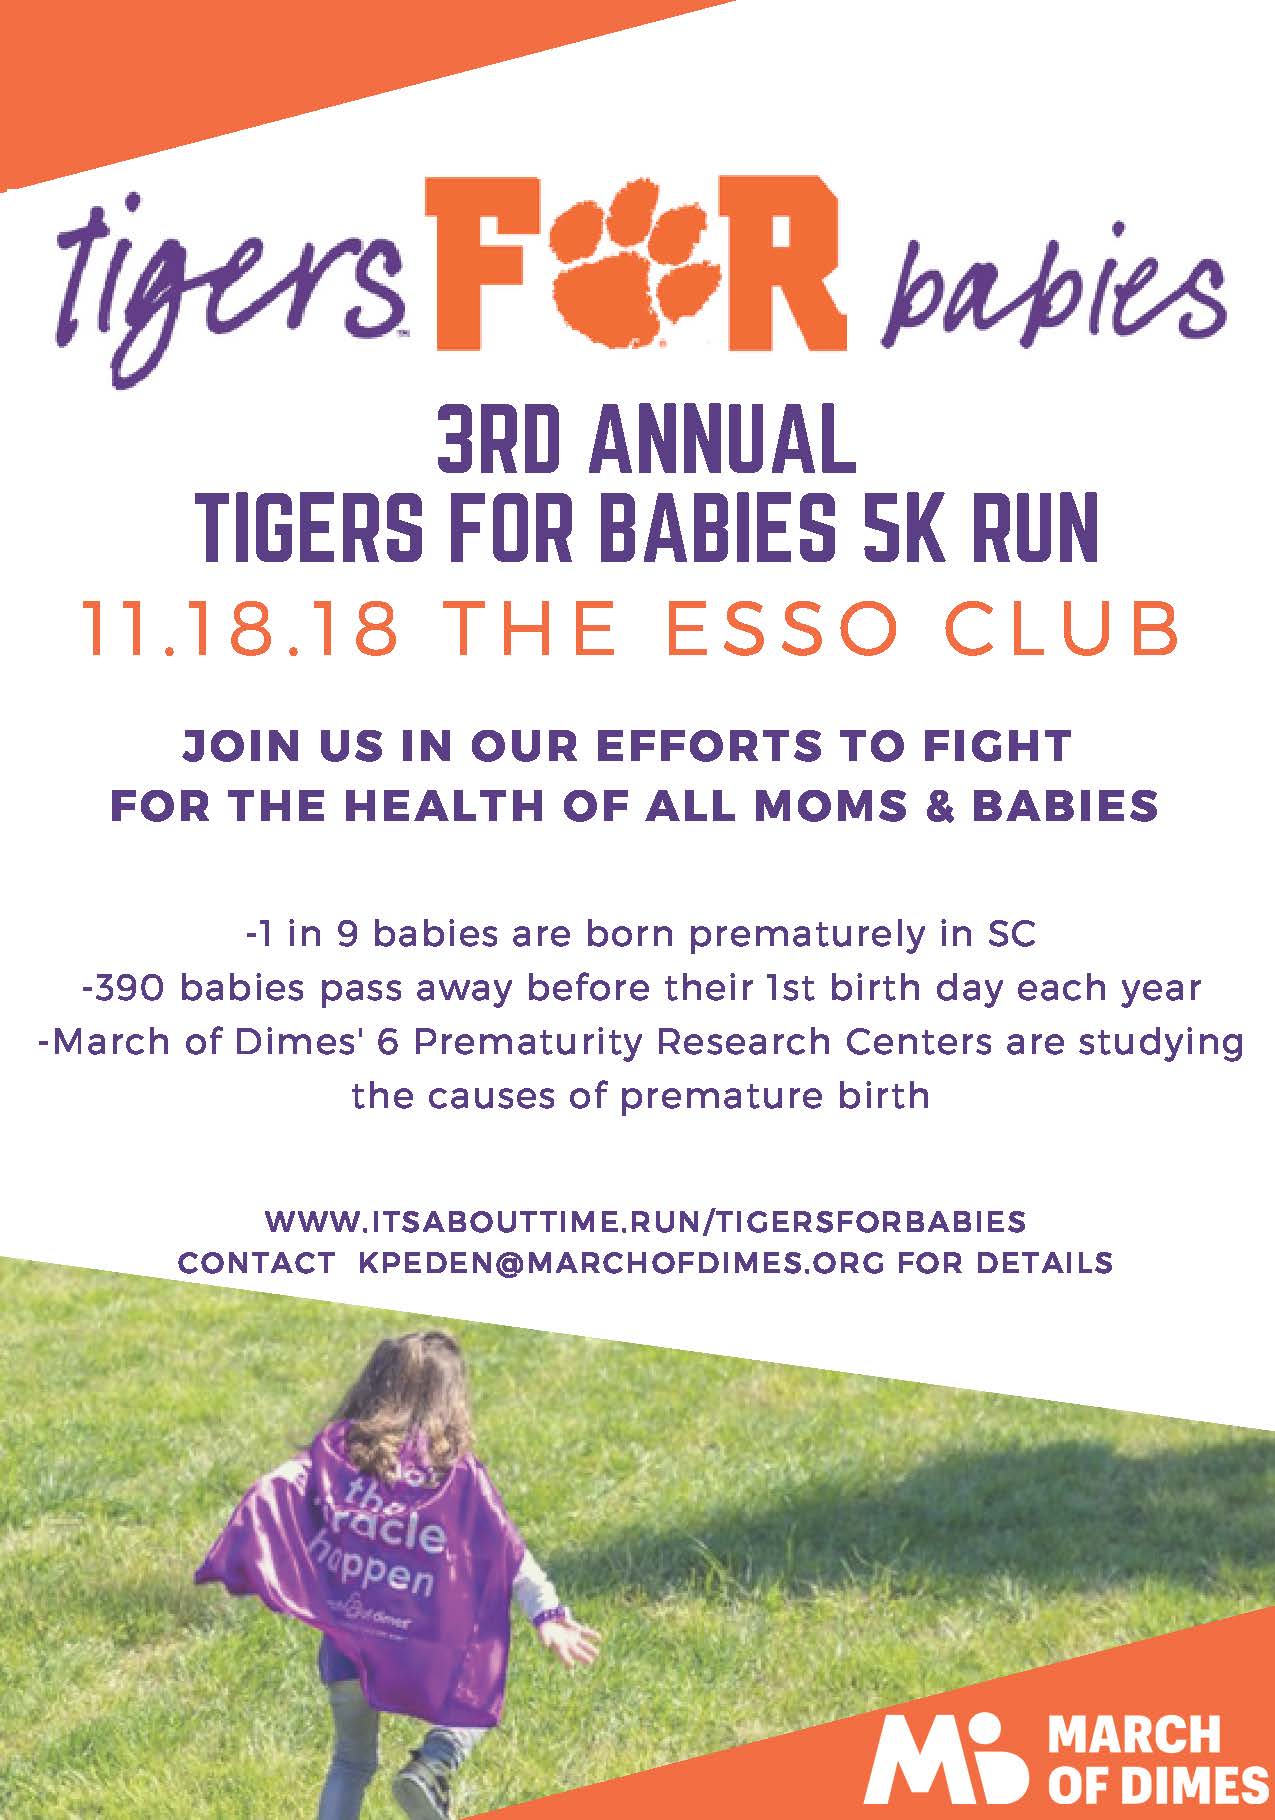 Tigers for Babies 5K Run November 18th, 2018 at The Esso Club